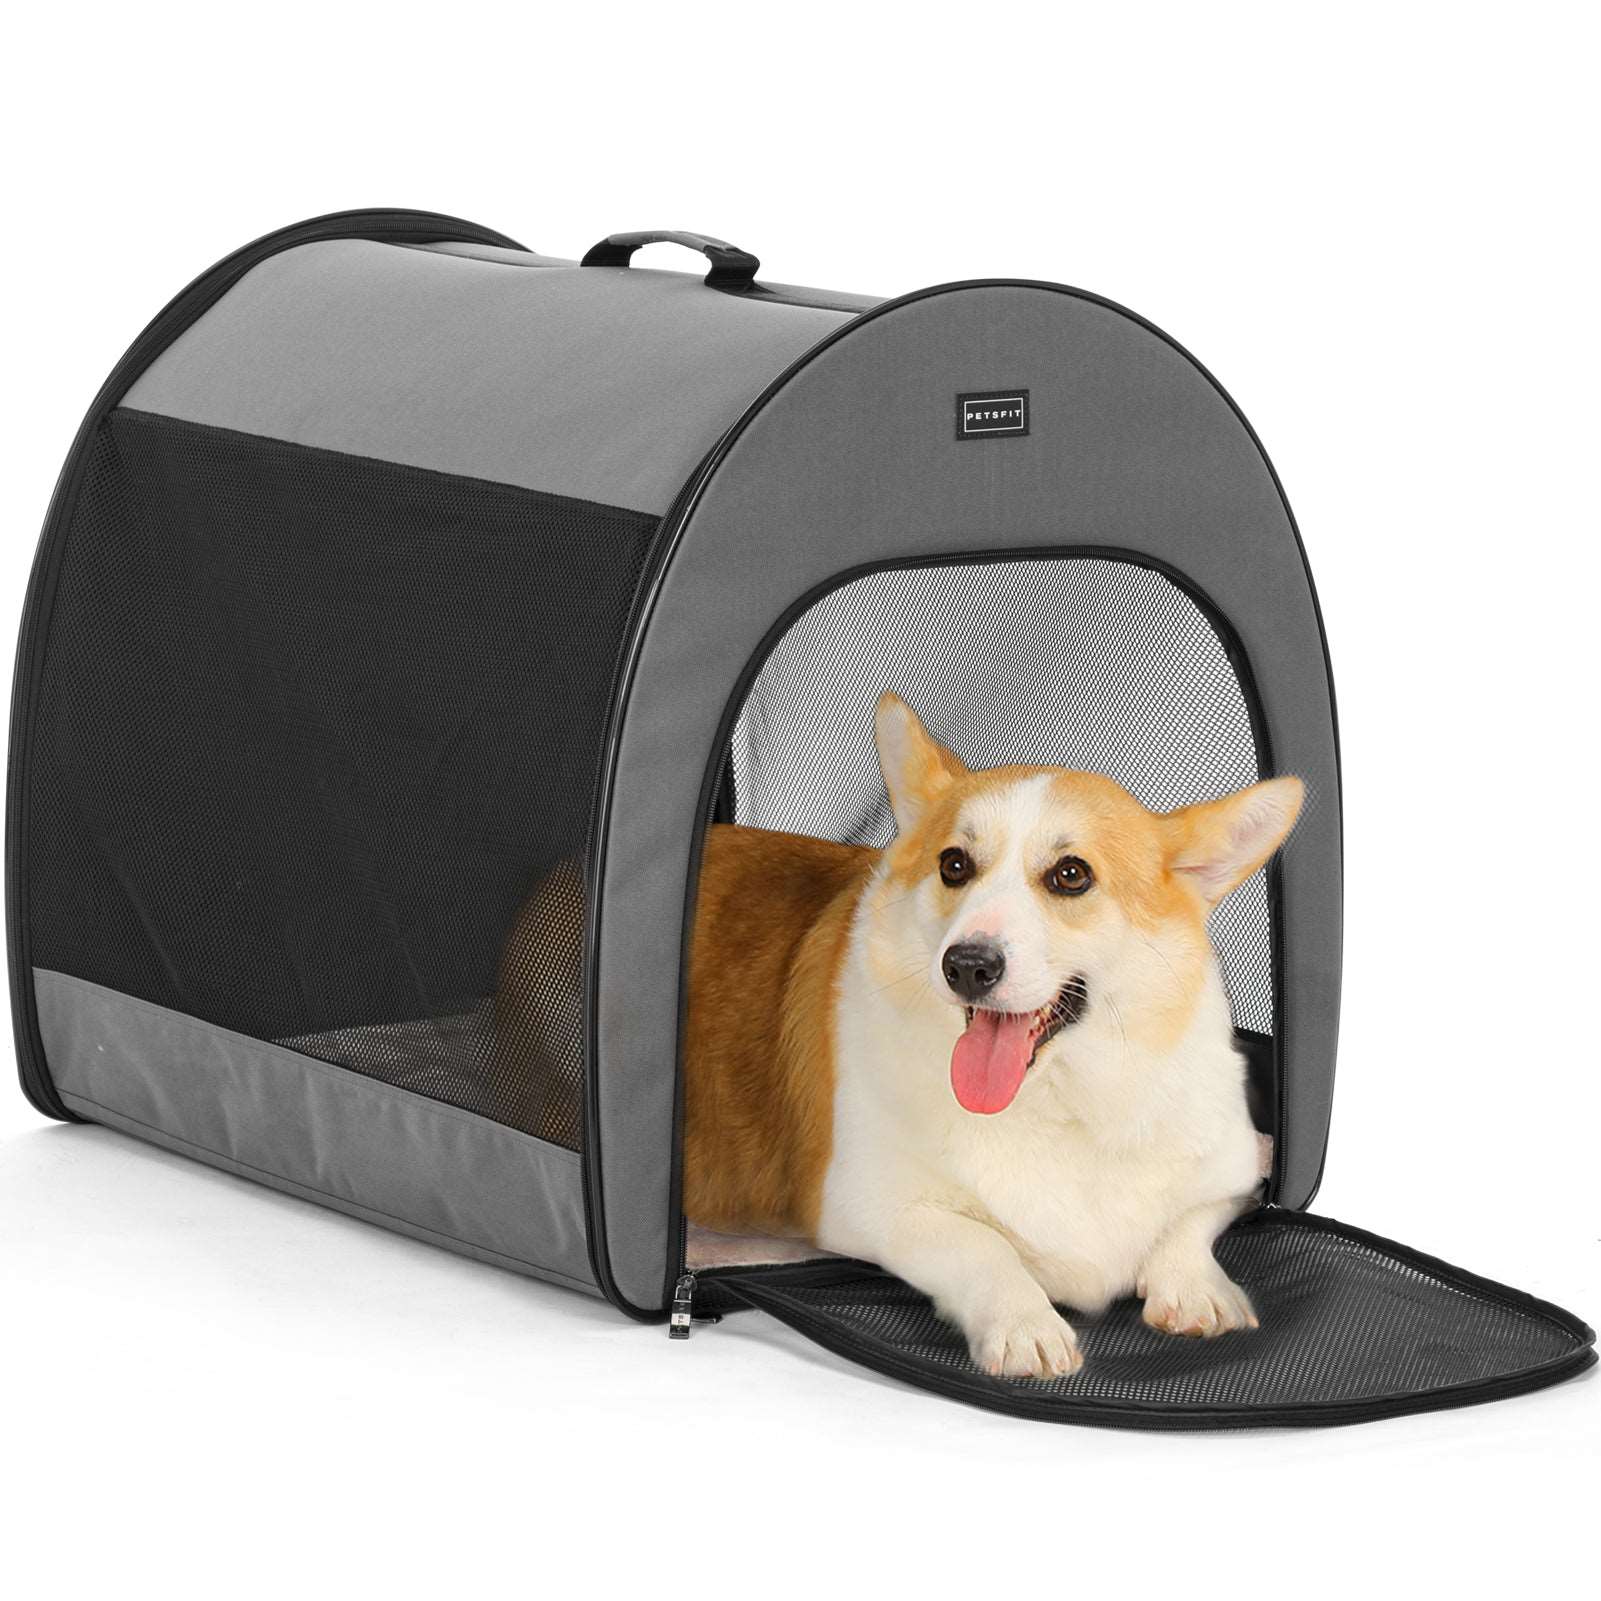 Petsfit-Arch-Design-Soft-Sided-Portable-Dog-Crate-03